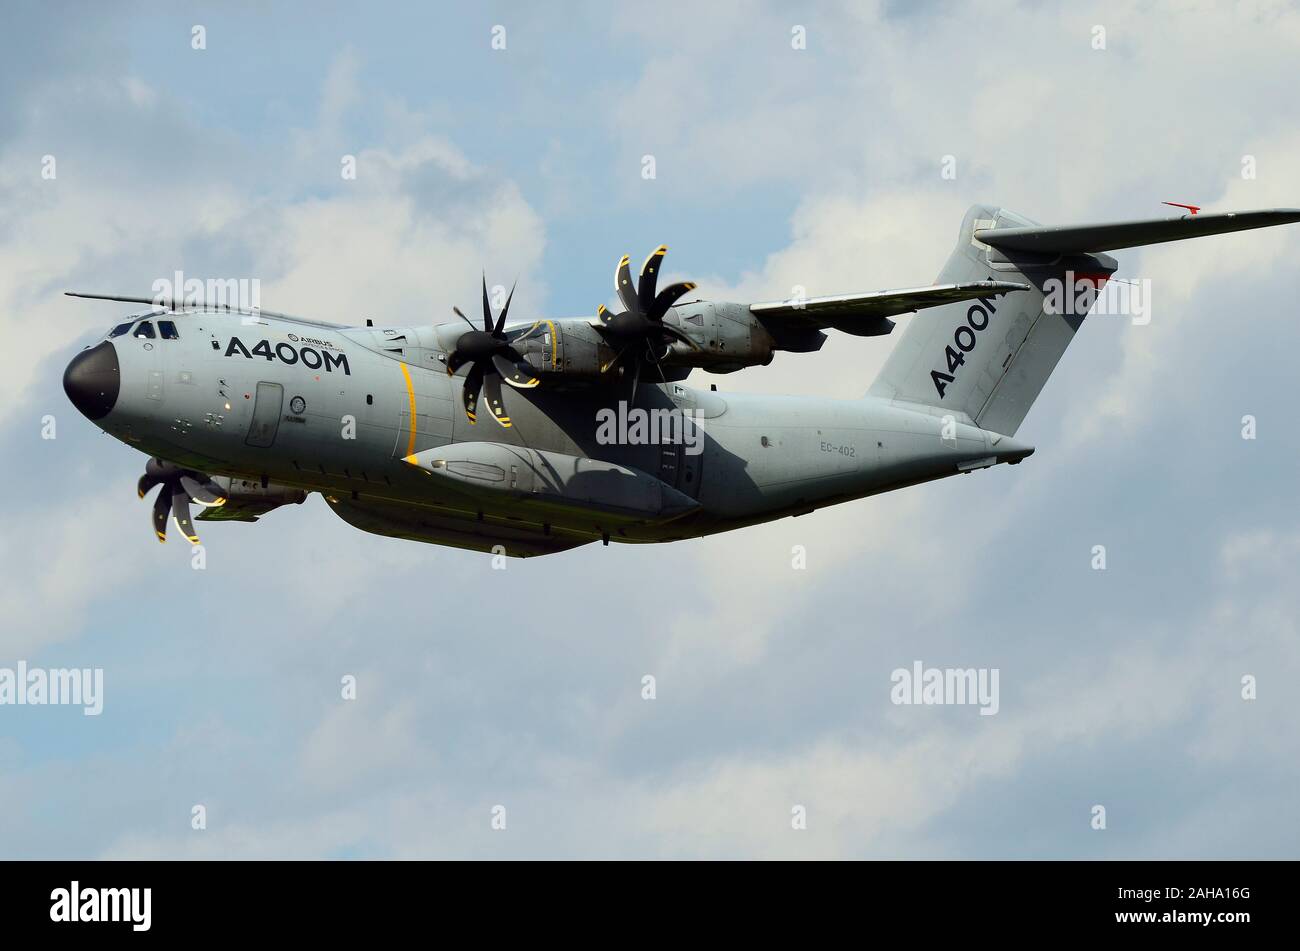 Zeltweg, Styria, Austria - September 02, 2016: Transporter Airbus A400 by public airshow named airpower 16 Stock Photo